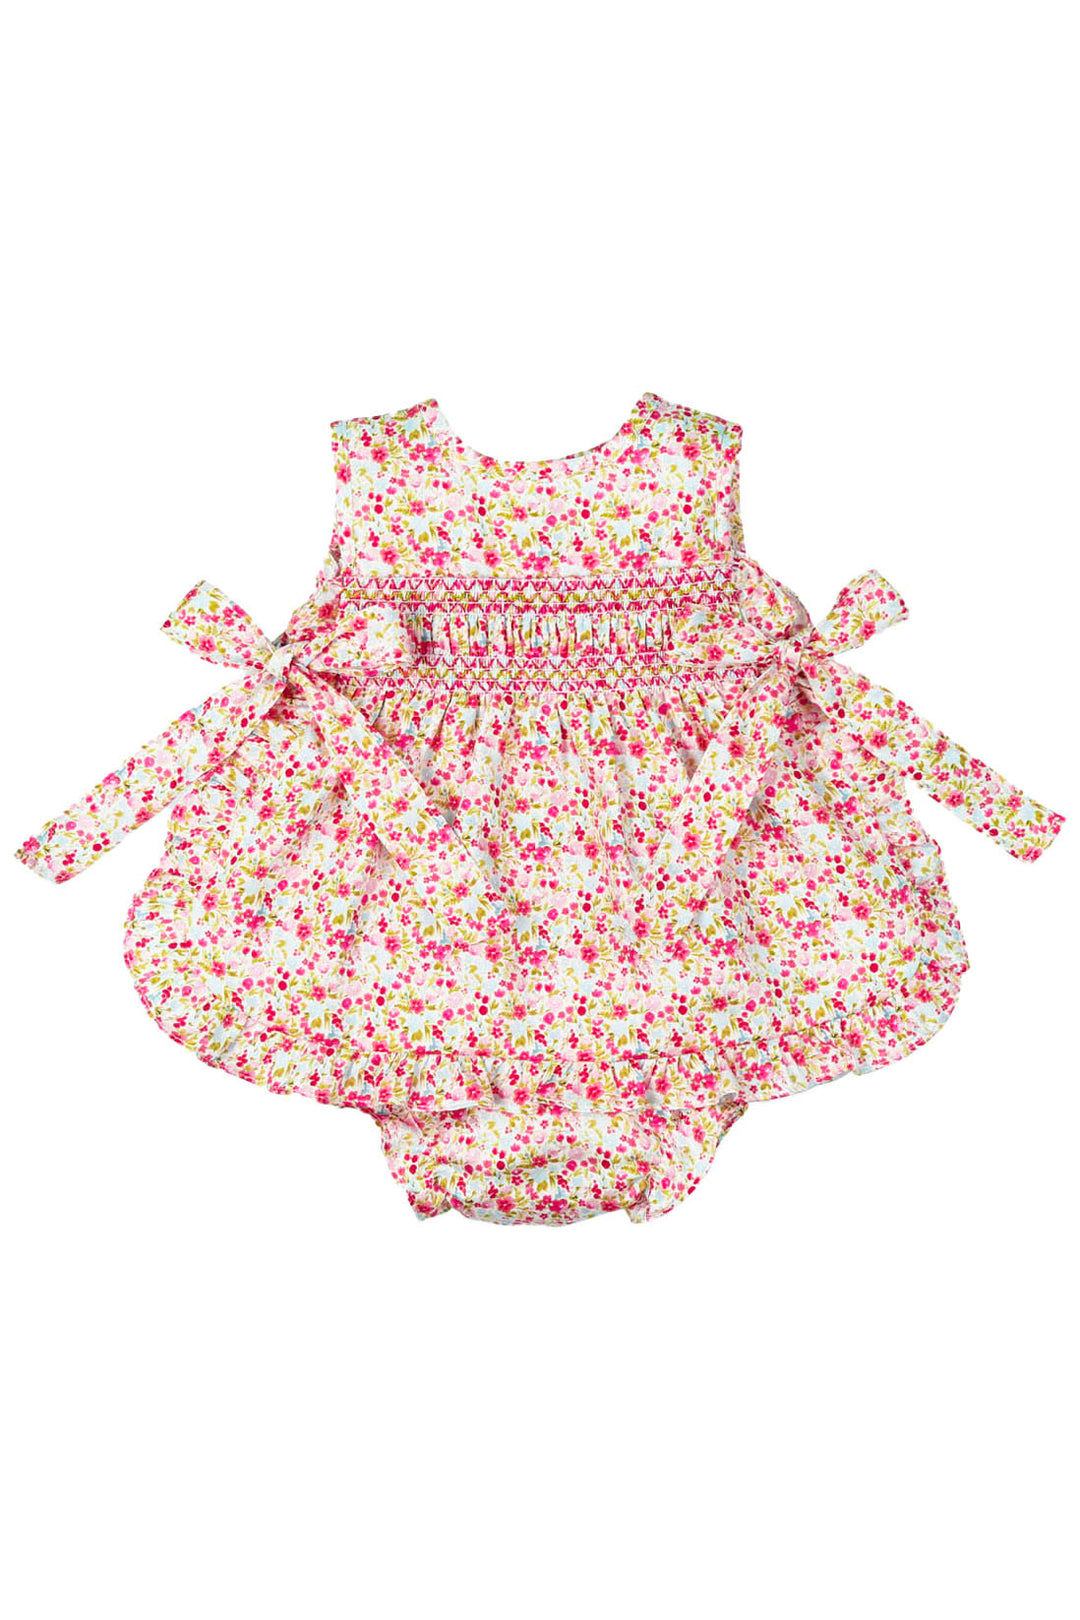 Mac Ilusión "Madeline" Bright Pink Floral Smocked Dress & Bloomers | Millie and John